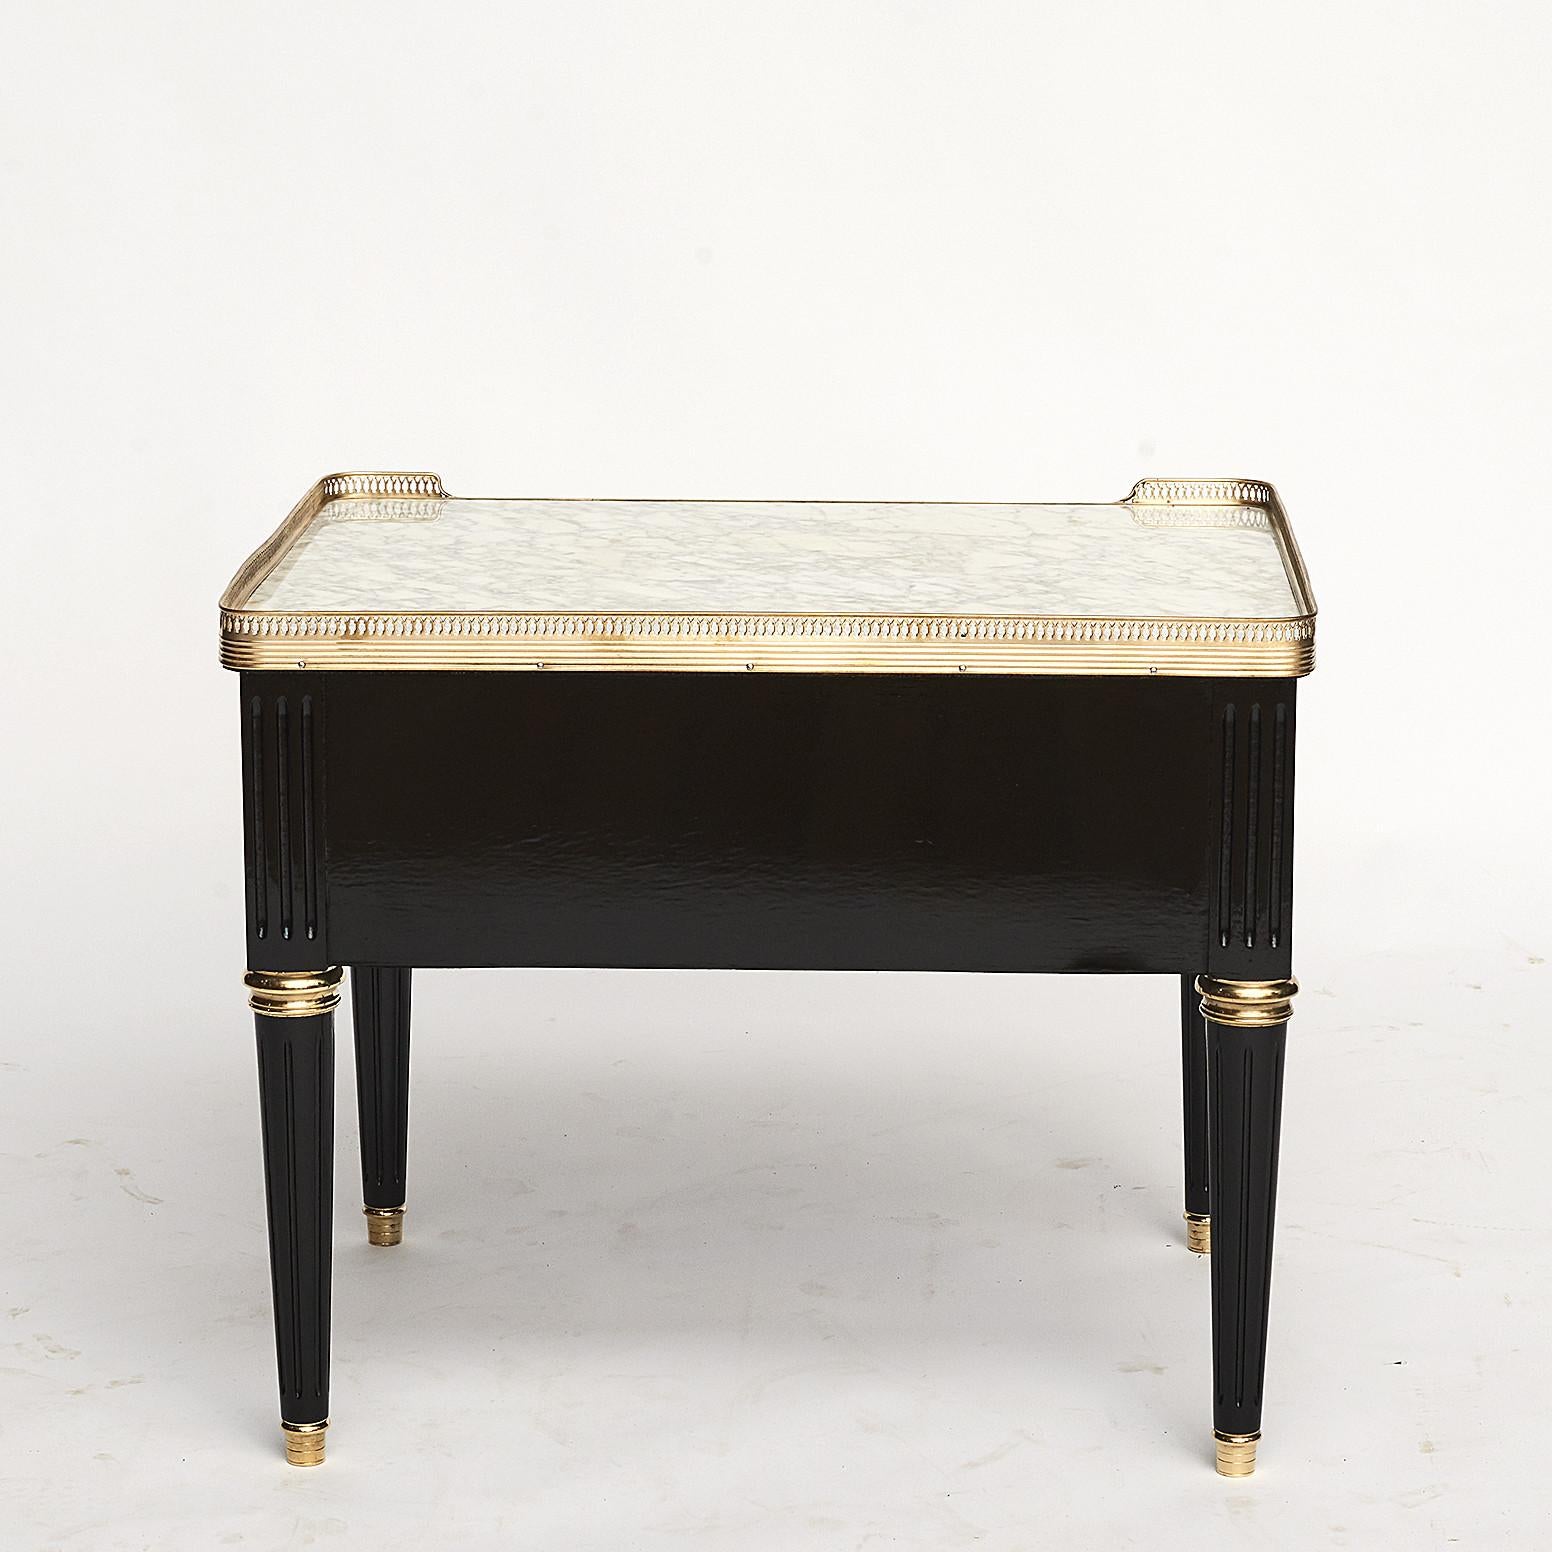 20th Century Pair of Louis XVI Style Marble-Topped Nightstands or Side Tables